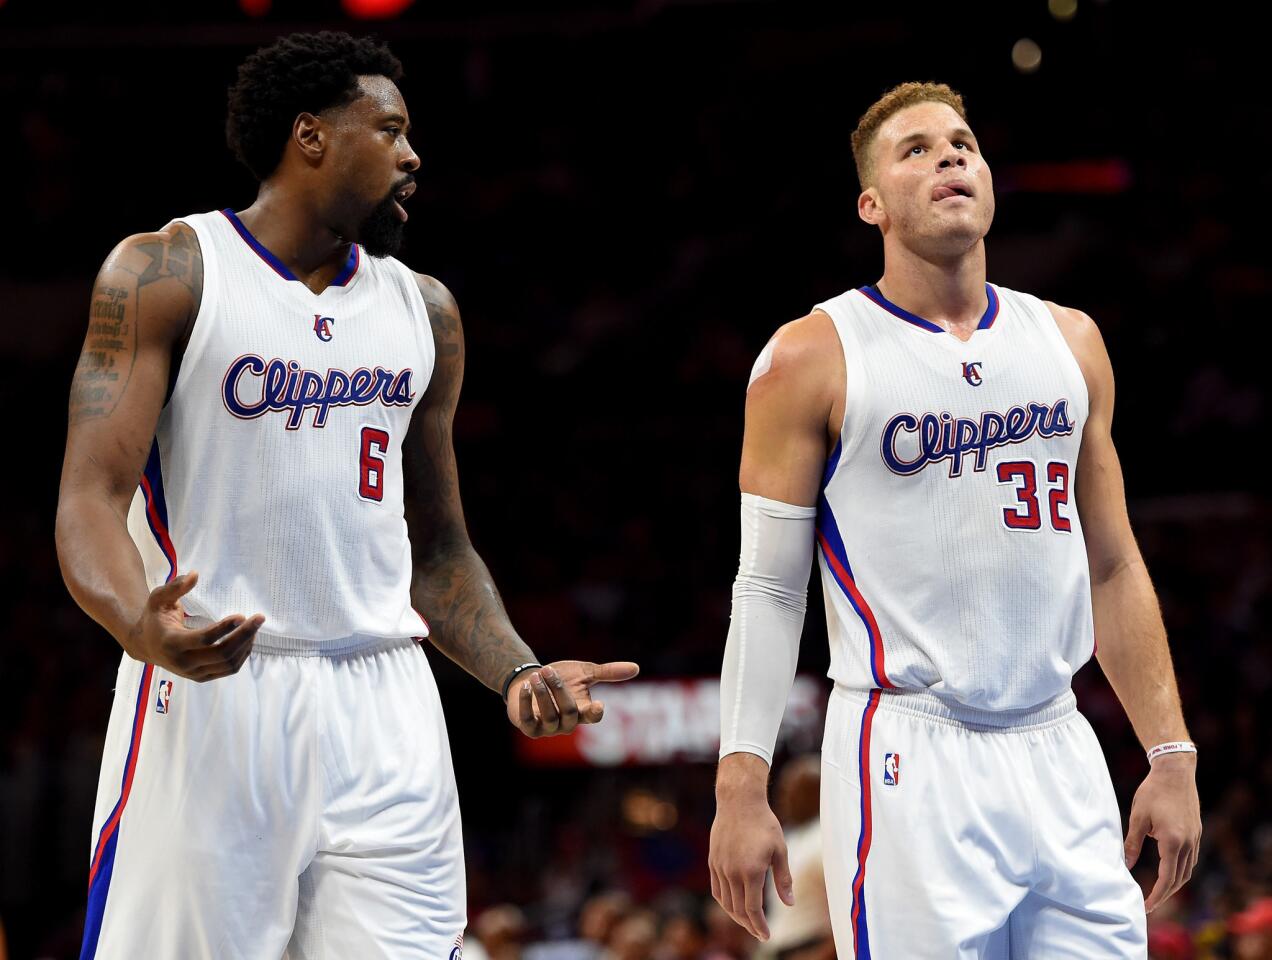 DeAndre Jordan and Blake Griffin talk during a break in the game Tuesday against the Lakers at Staples Center.